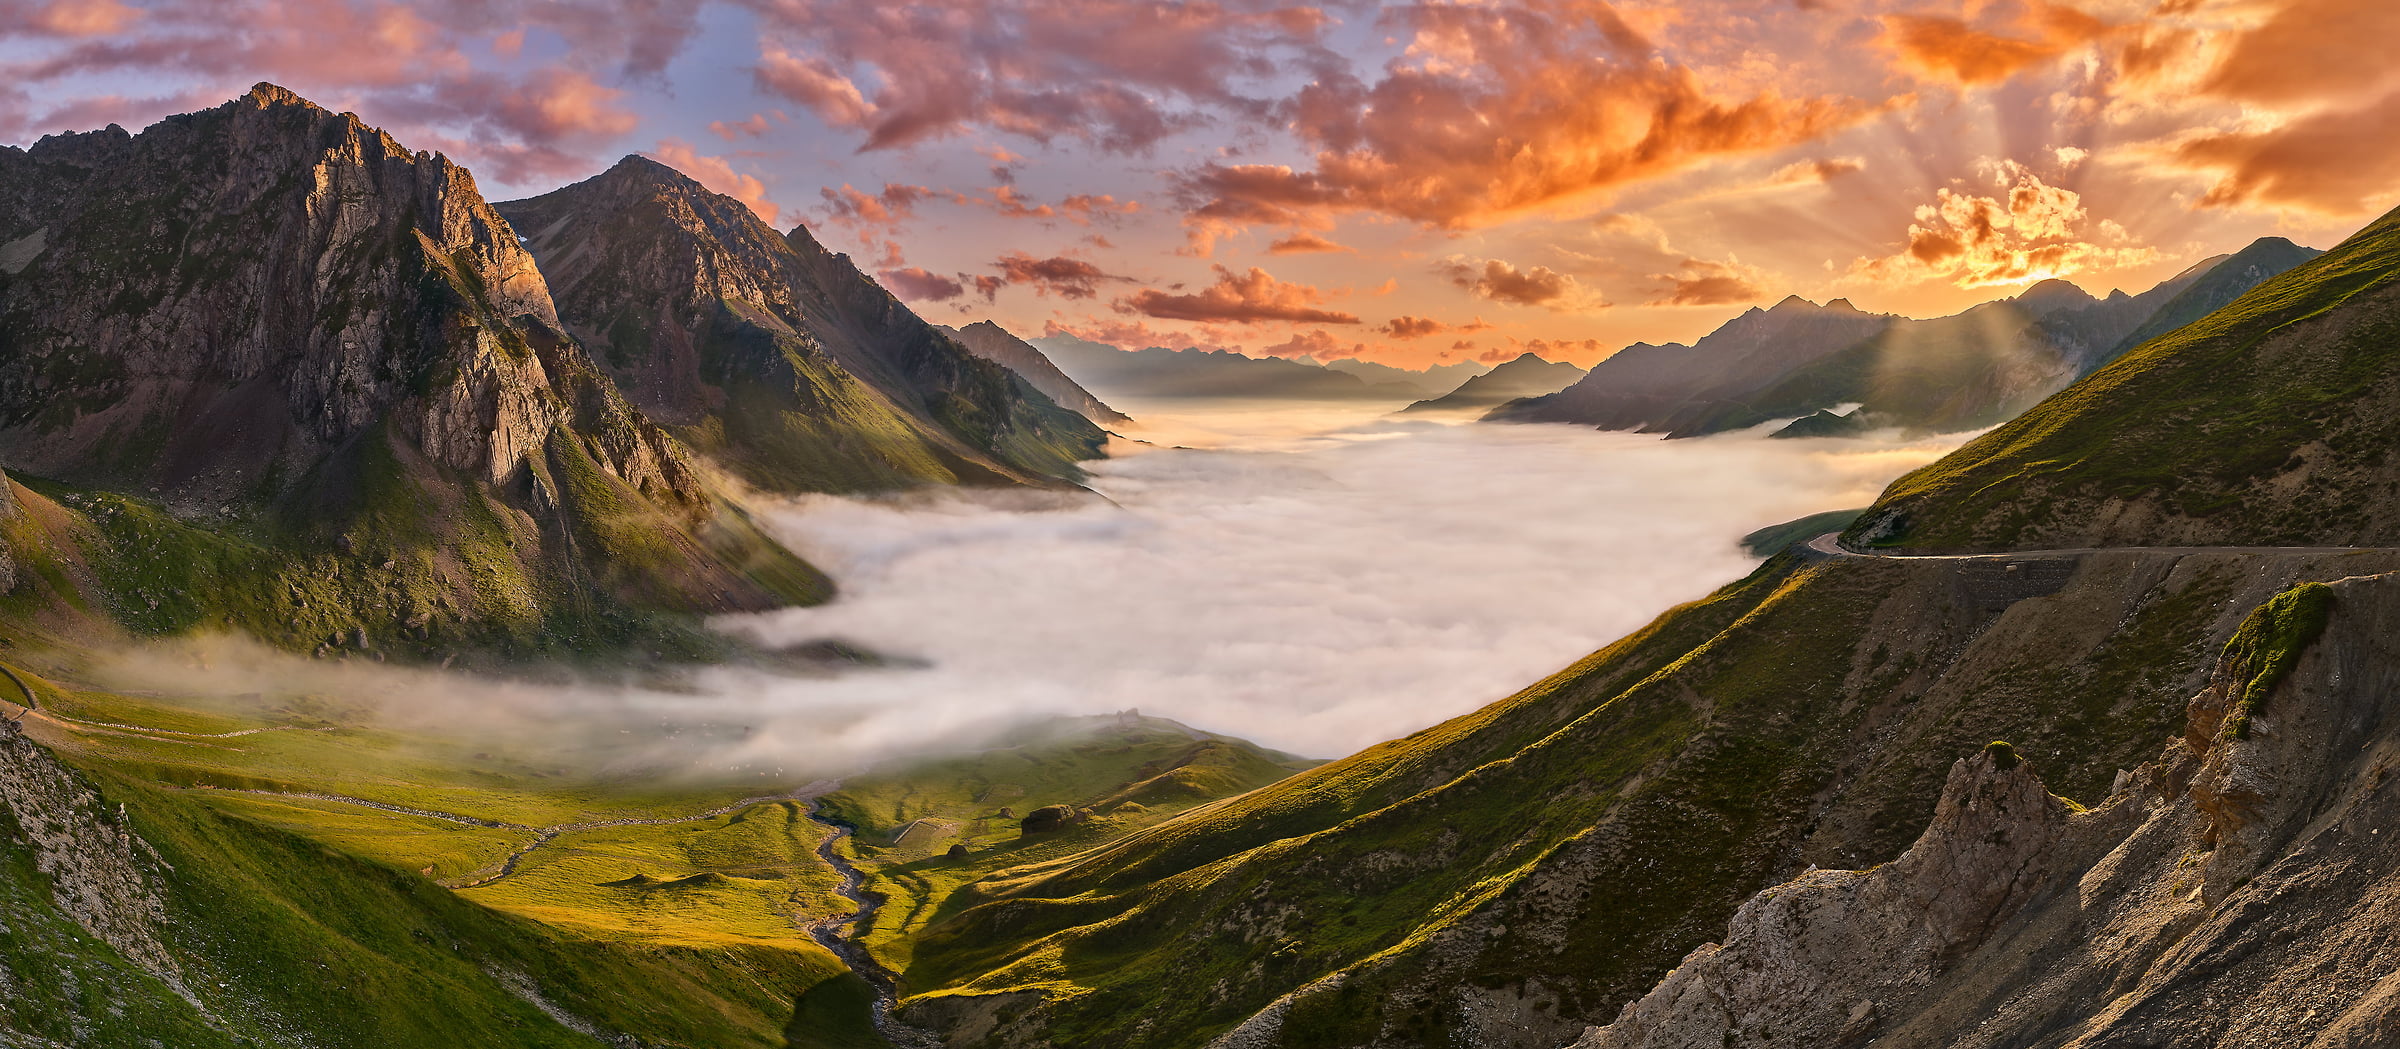 320 megapixels! A very high resolution, large-format VAST photo print of a sunset landscape with a valley, fog, mountains, and beautiful clouds; photograph created by David Meaux in Vallée de Barèges, Hautes-Pyrénées, France.